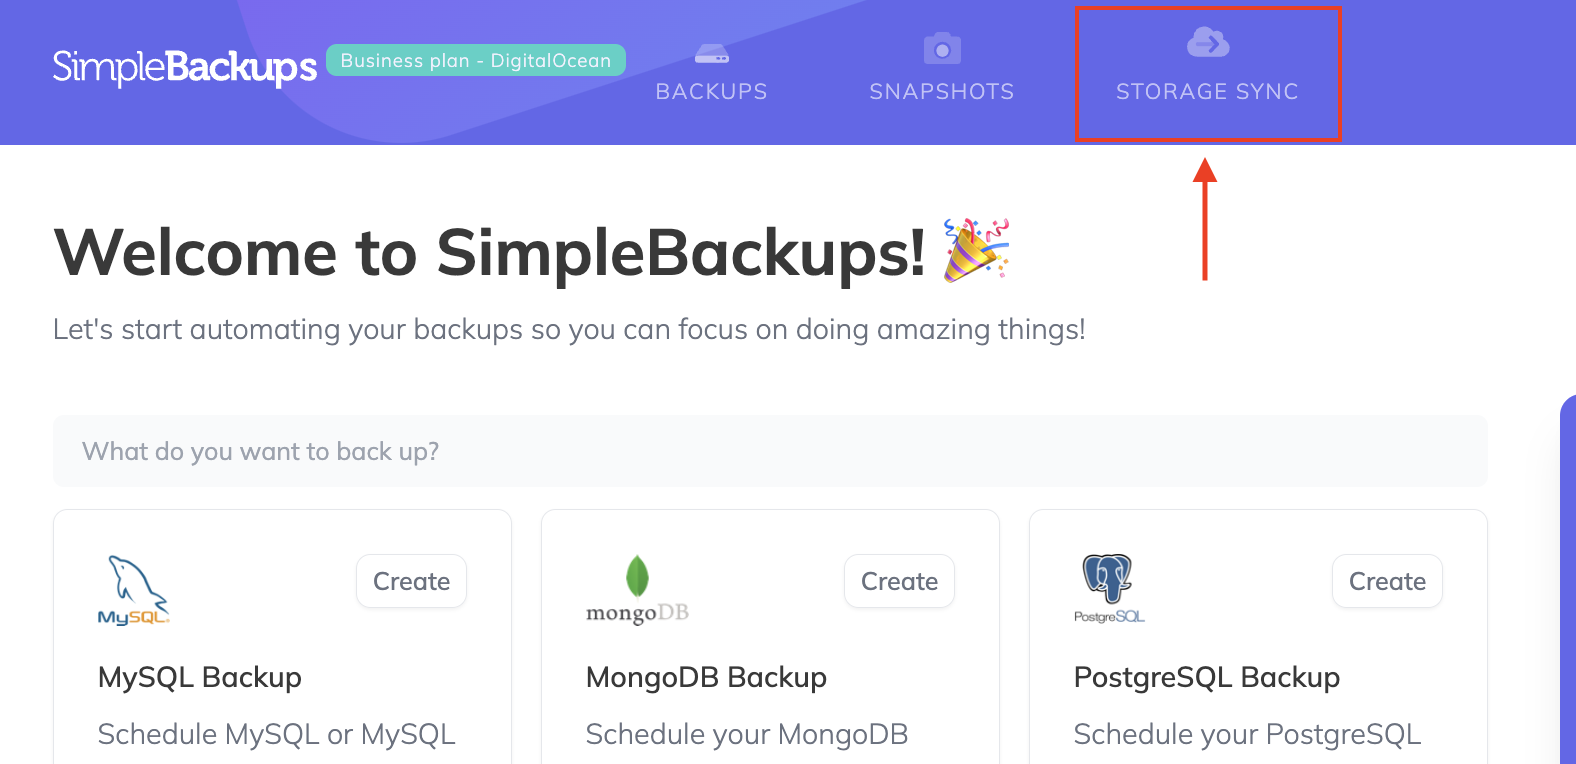 How to create a storage replication with SimpleBackups